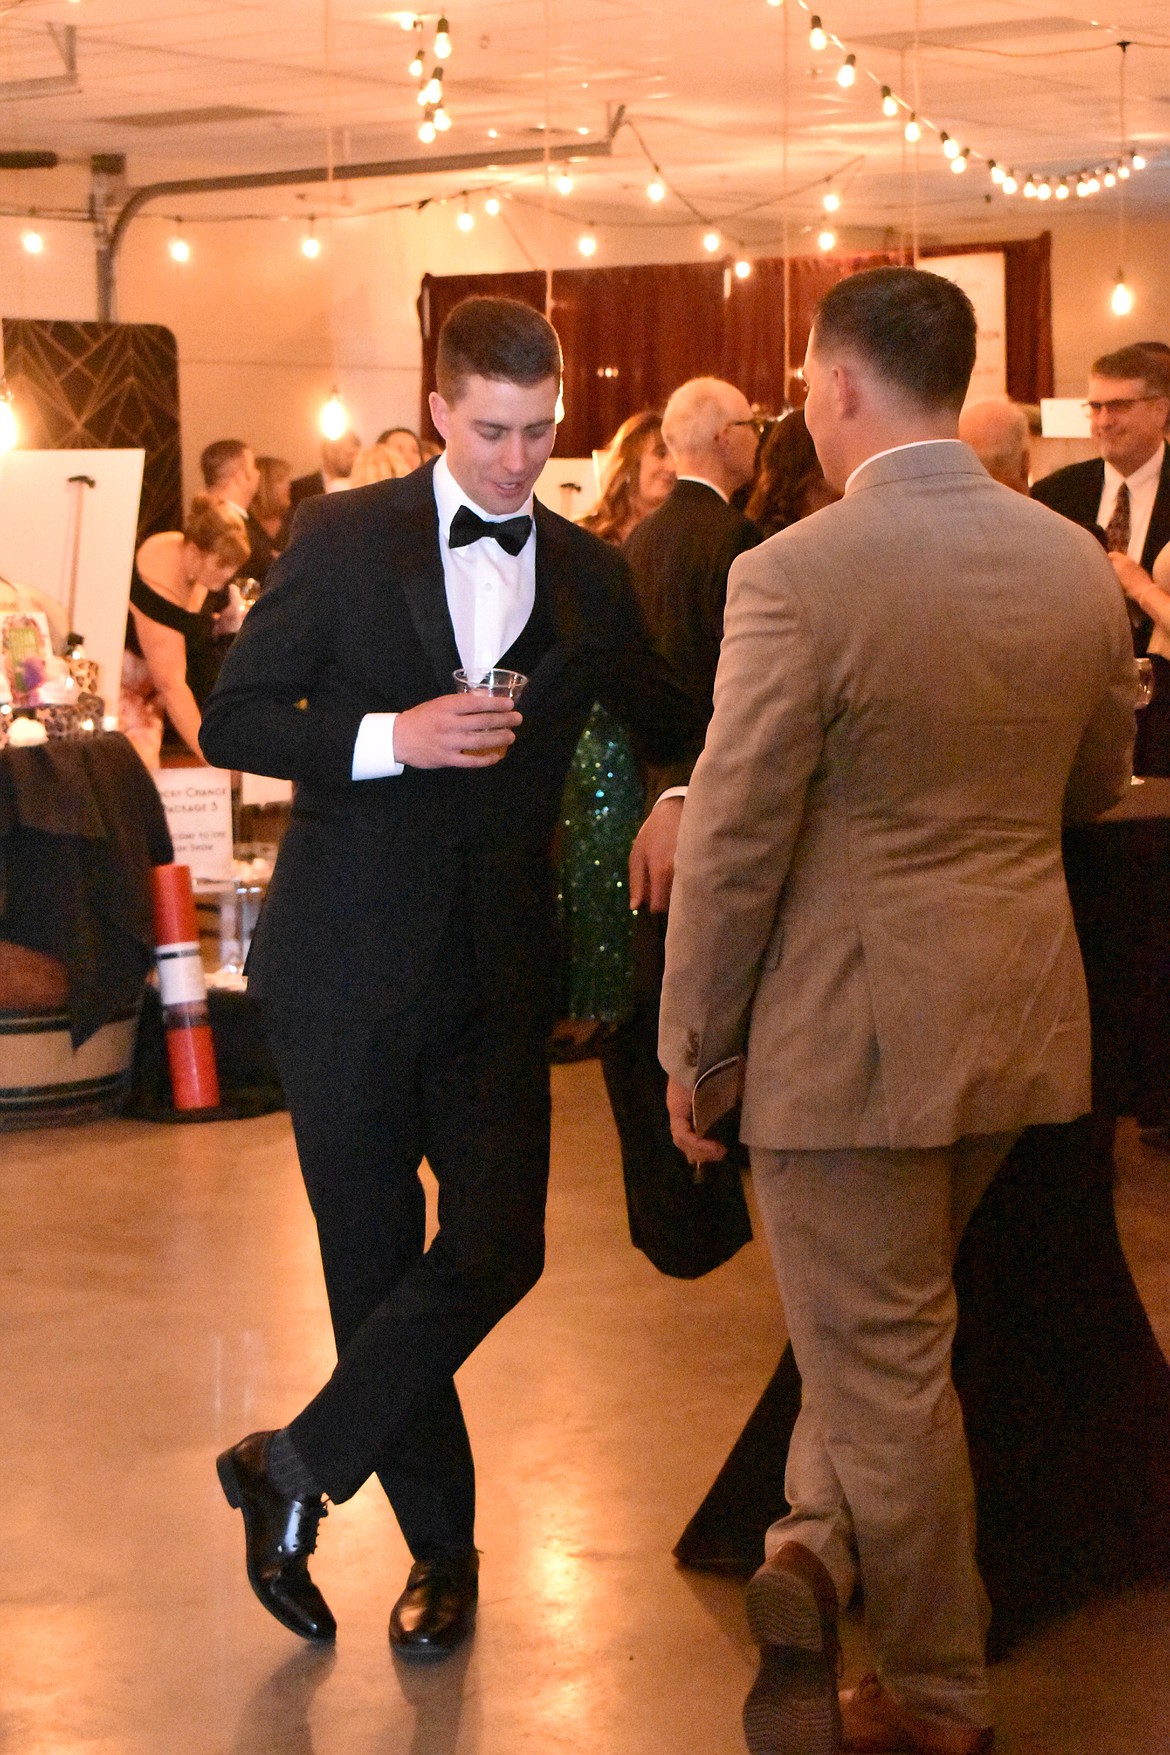 The second annual Bourbon & Bowties Gala, held April 29, saw guests dressed to the nines in dresses and tuxes. Proceeds from the event support efforts to bring a new hospital campus to the Columbia Basin.